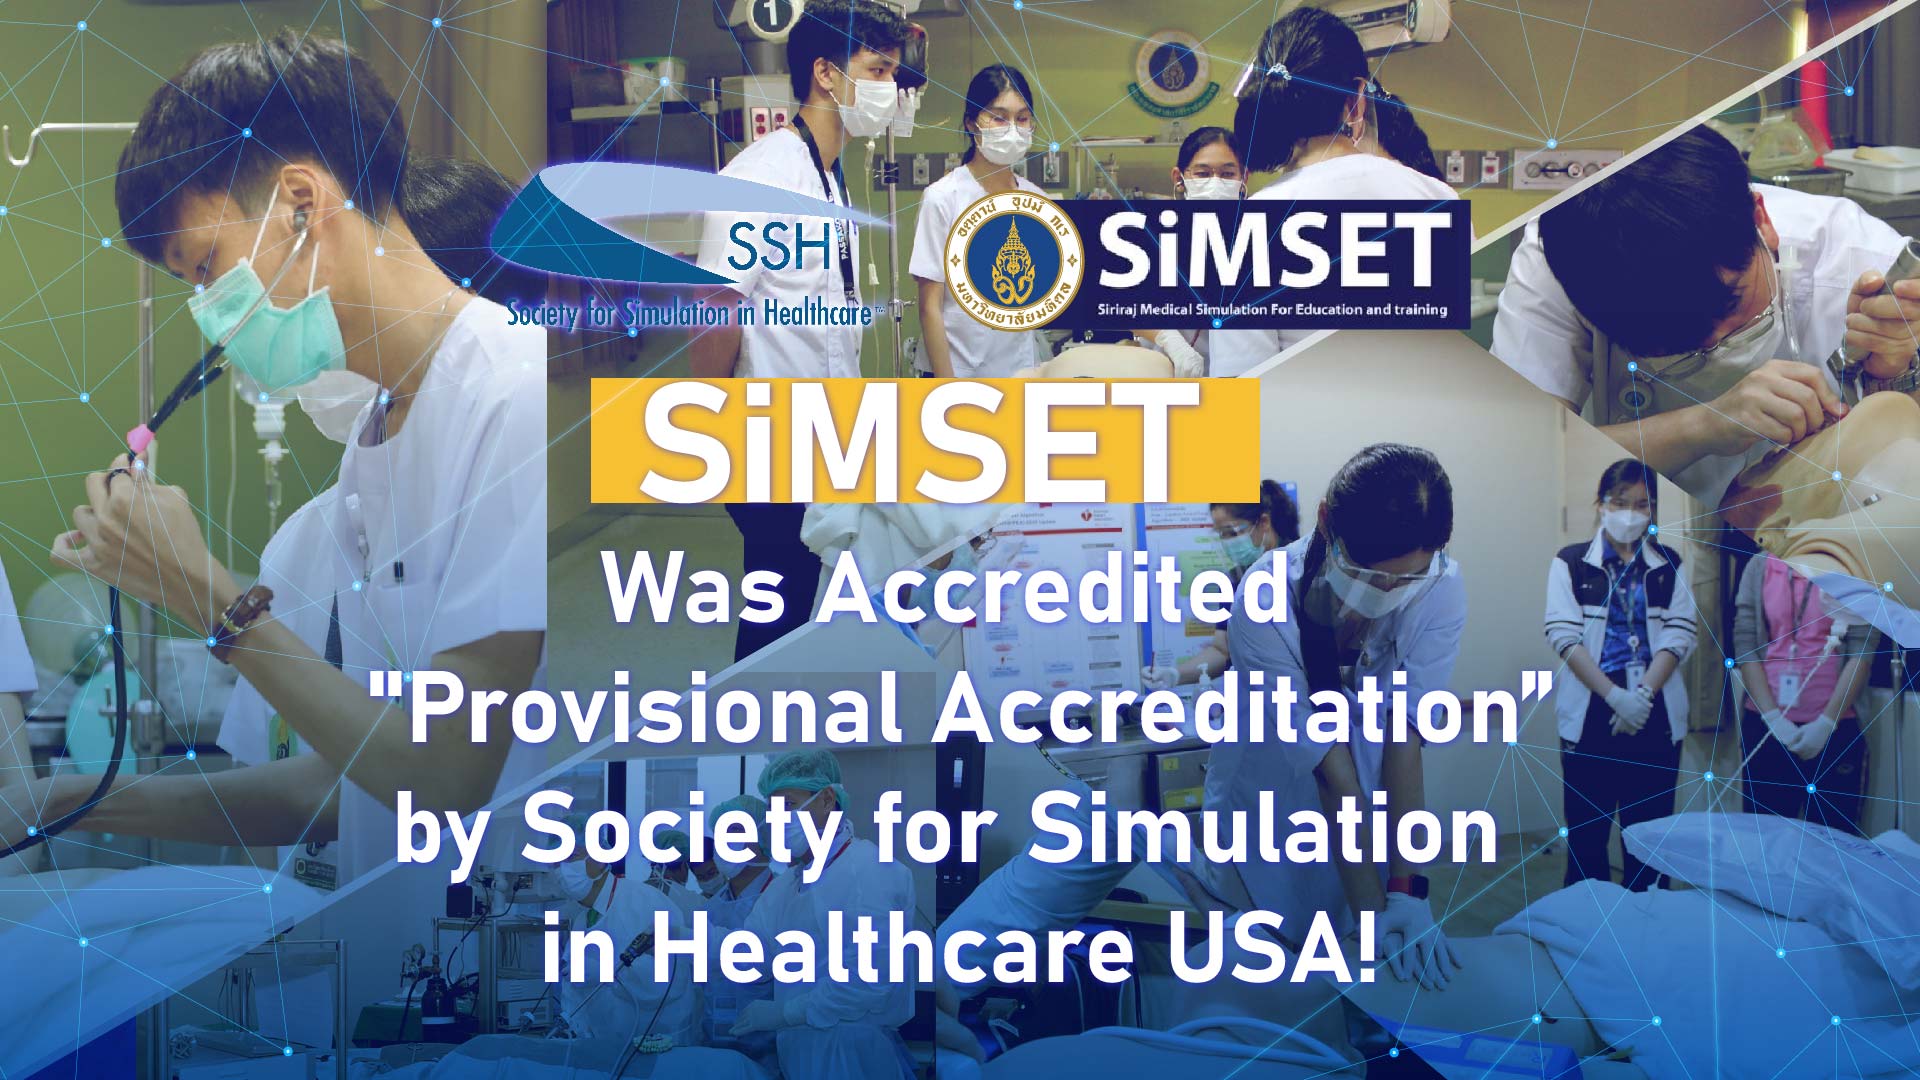 SiMSET Was Accredited by Society for Simulation in Healthcare USA SIRIRAJ